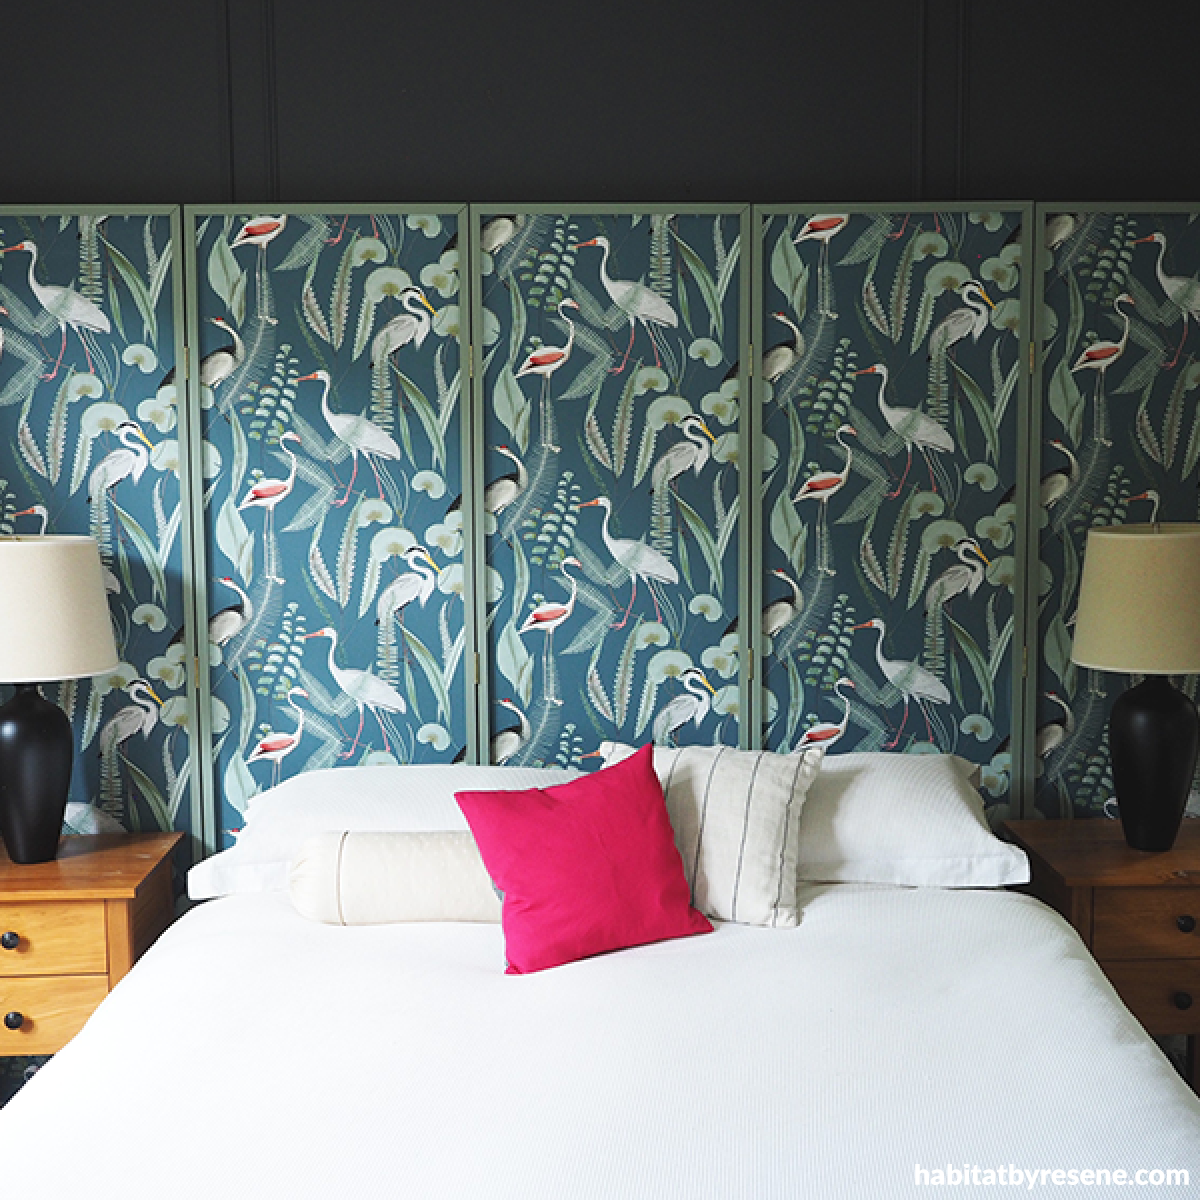 How to create a patterned DIY headboard | Habitat by Resene